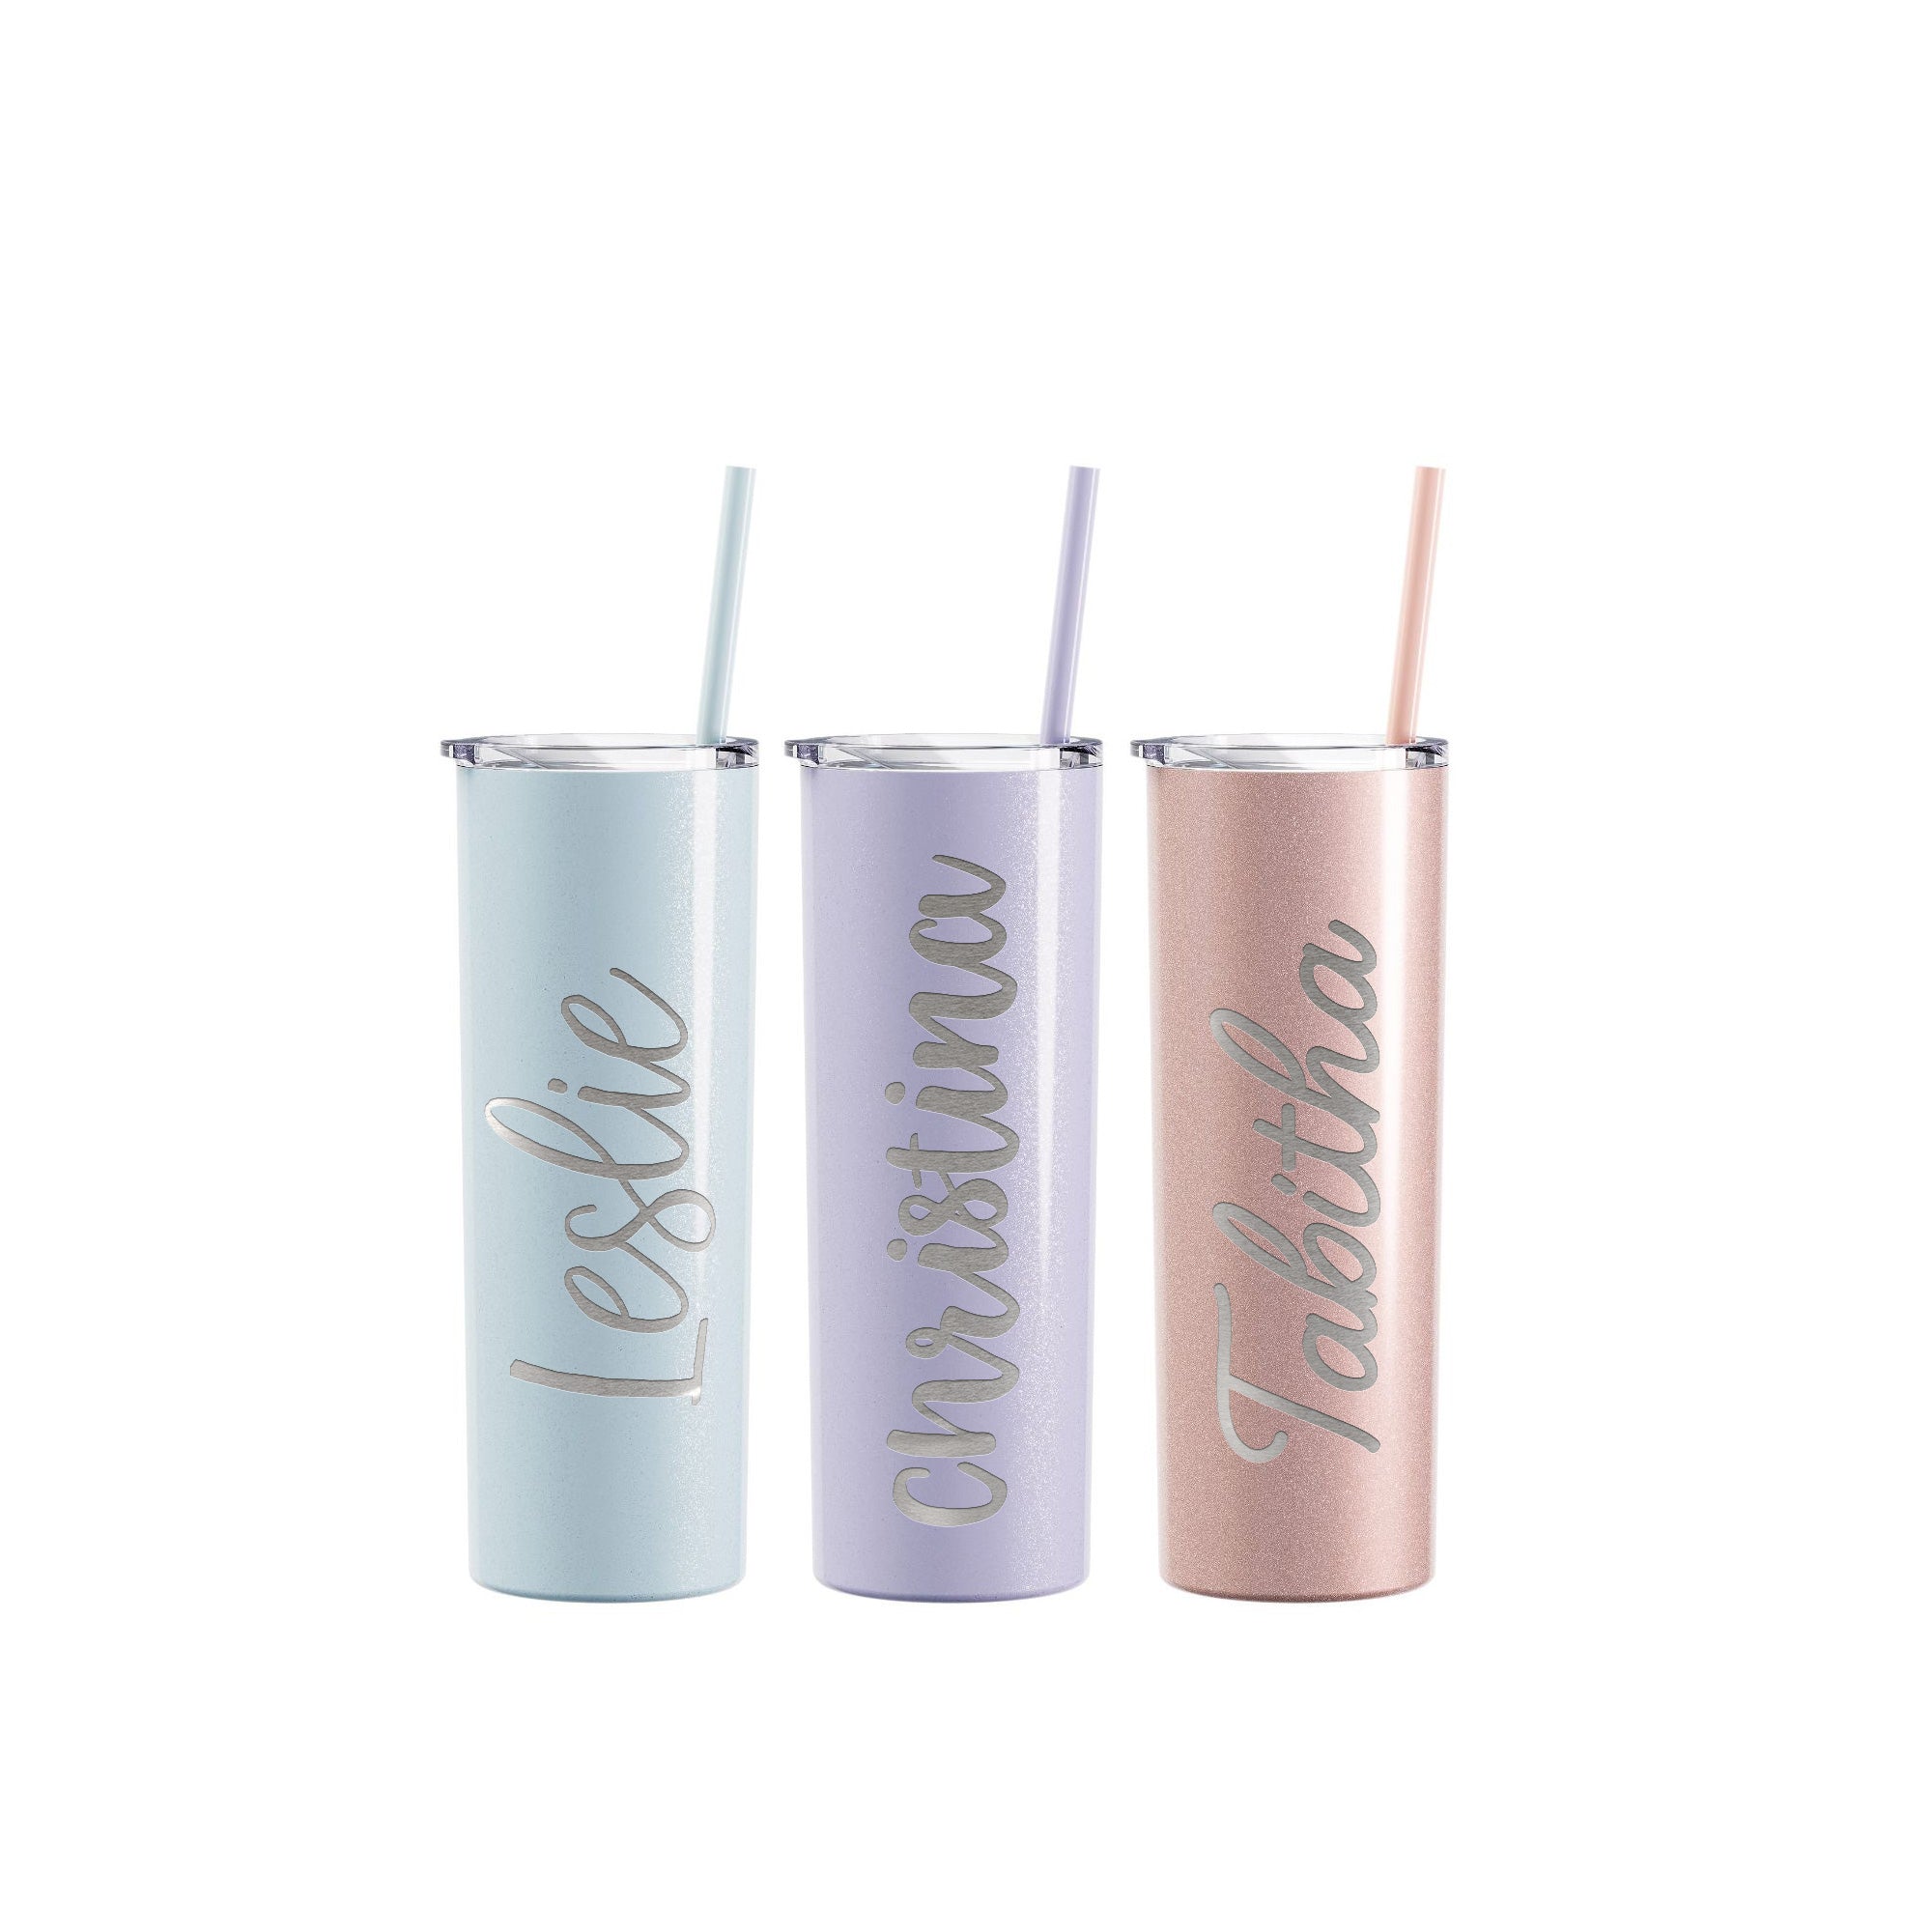 Personalized Tumbler With Lid and Straw, Bridesmaids Gifts, Cheap Tumbler,  Skinny Tumbler, Personalized Gift for her, custom cup